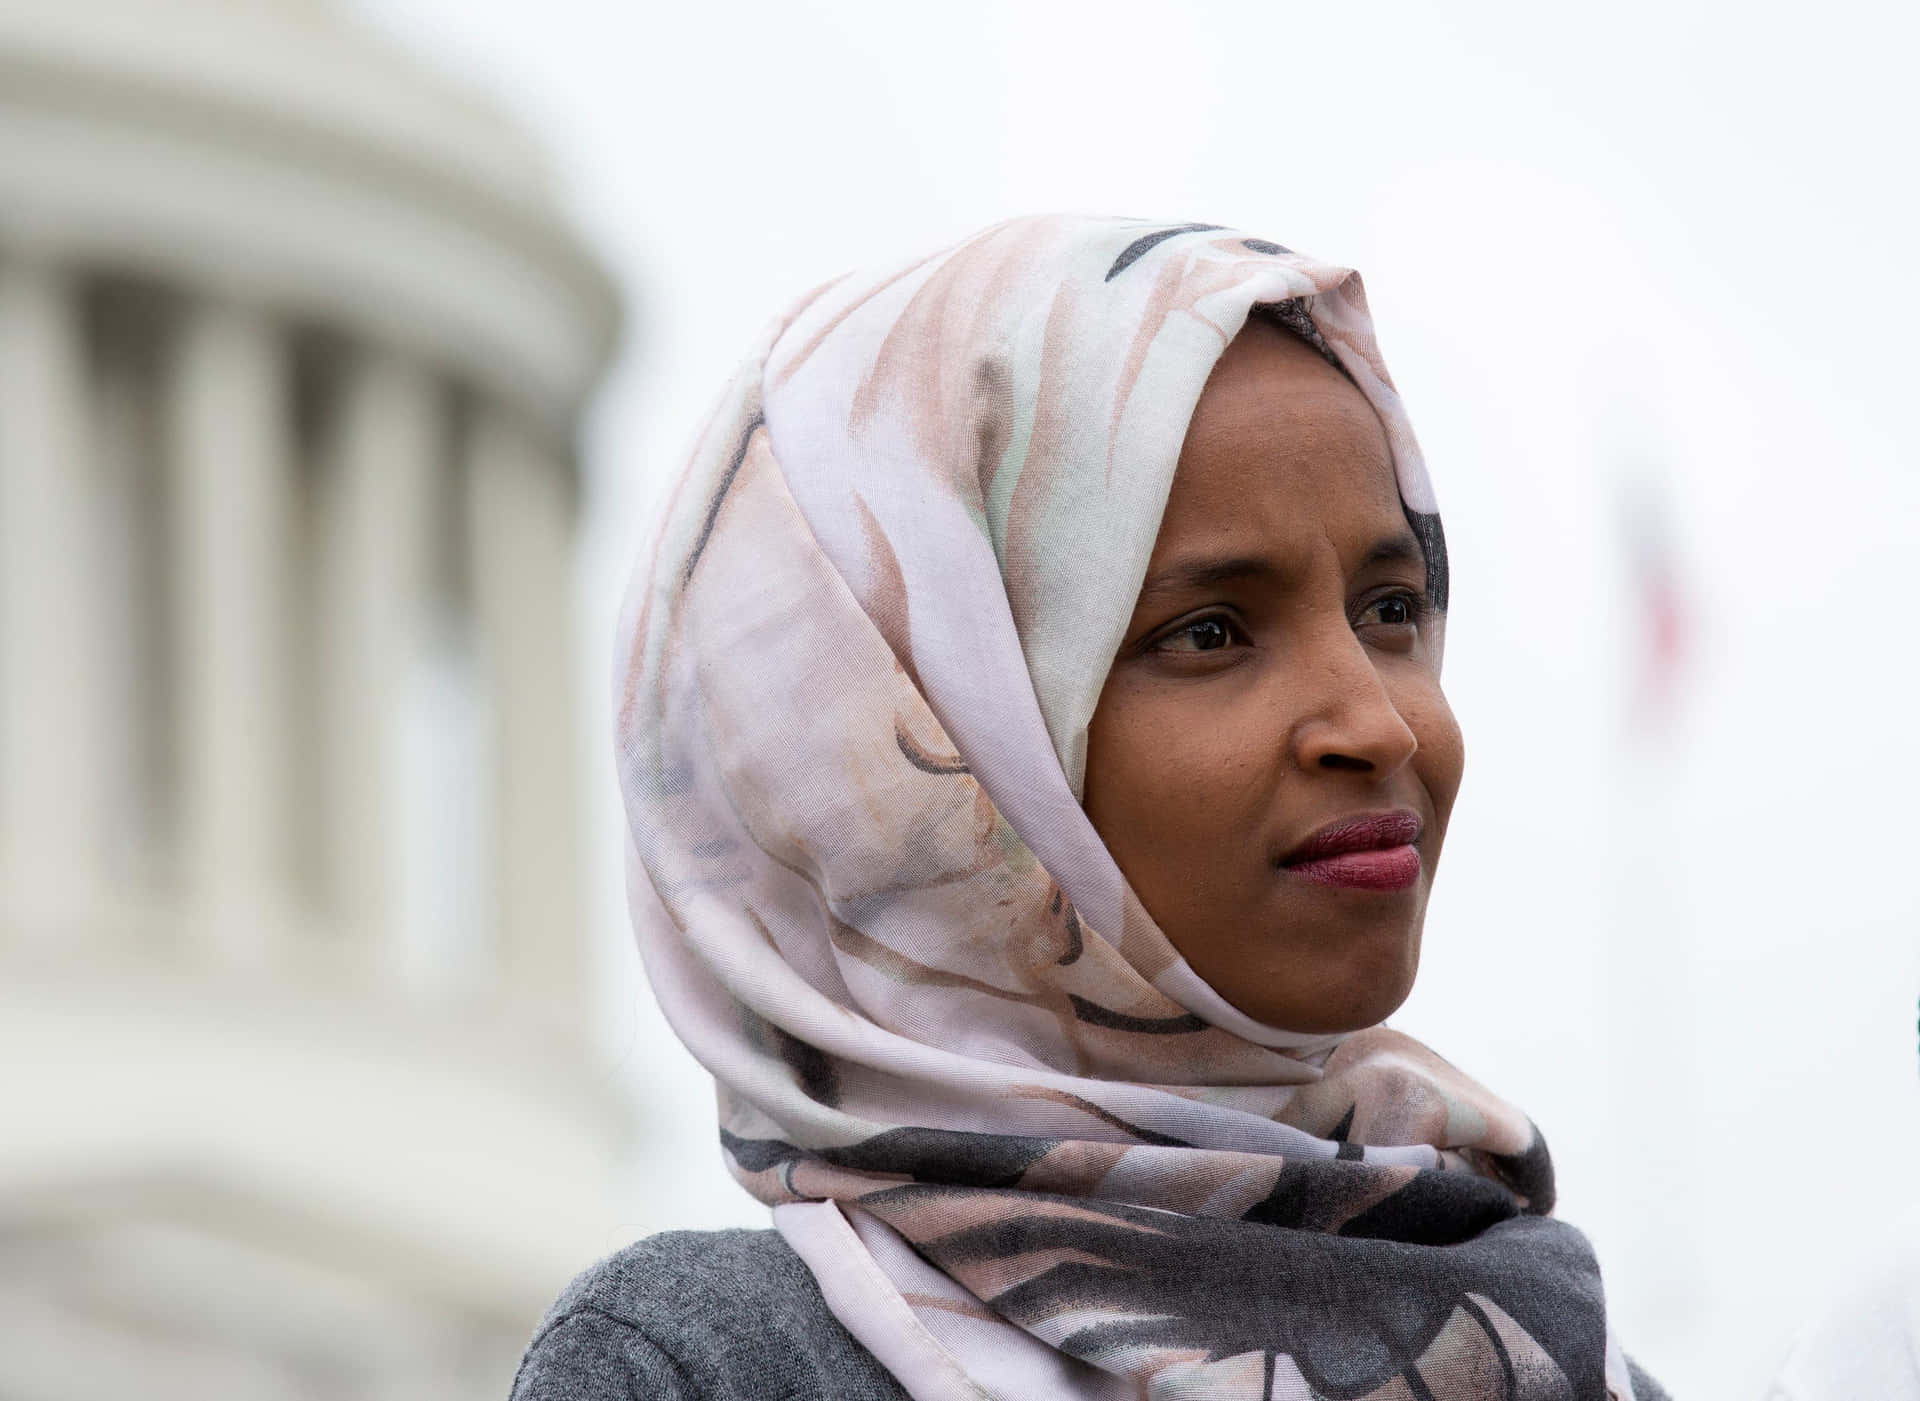 Ilhan Omar About To Smile Wallpaper